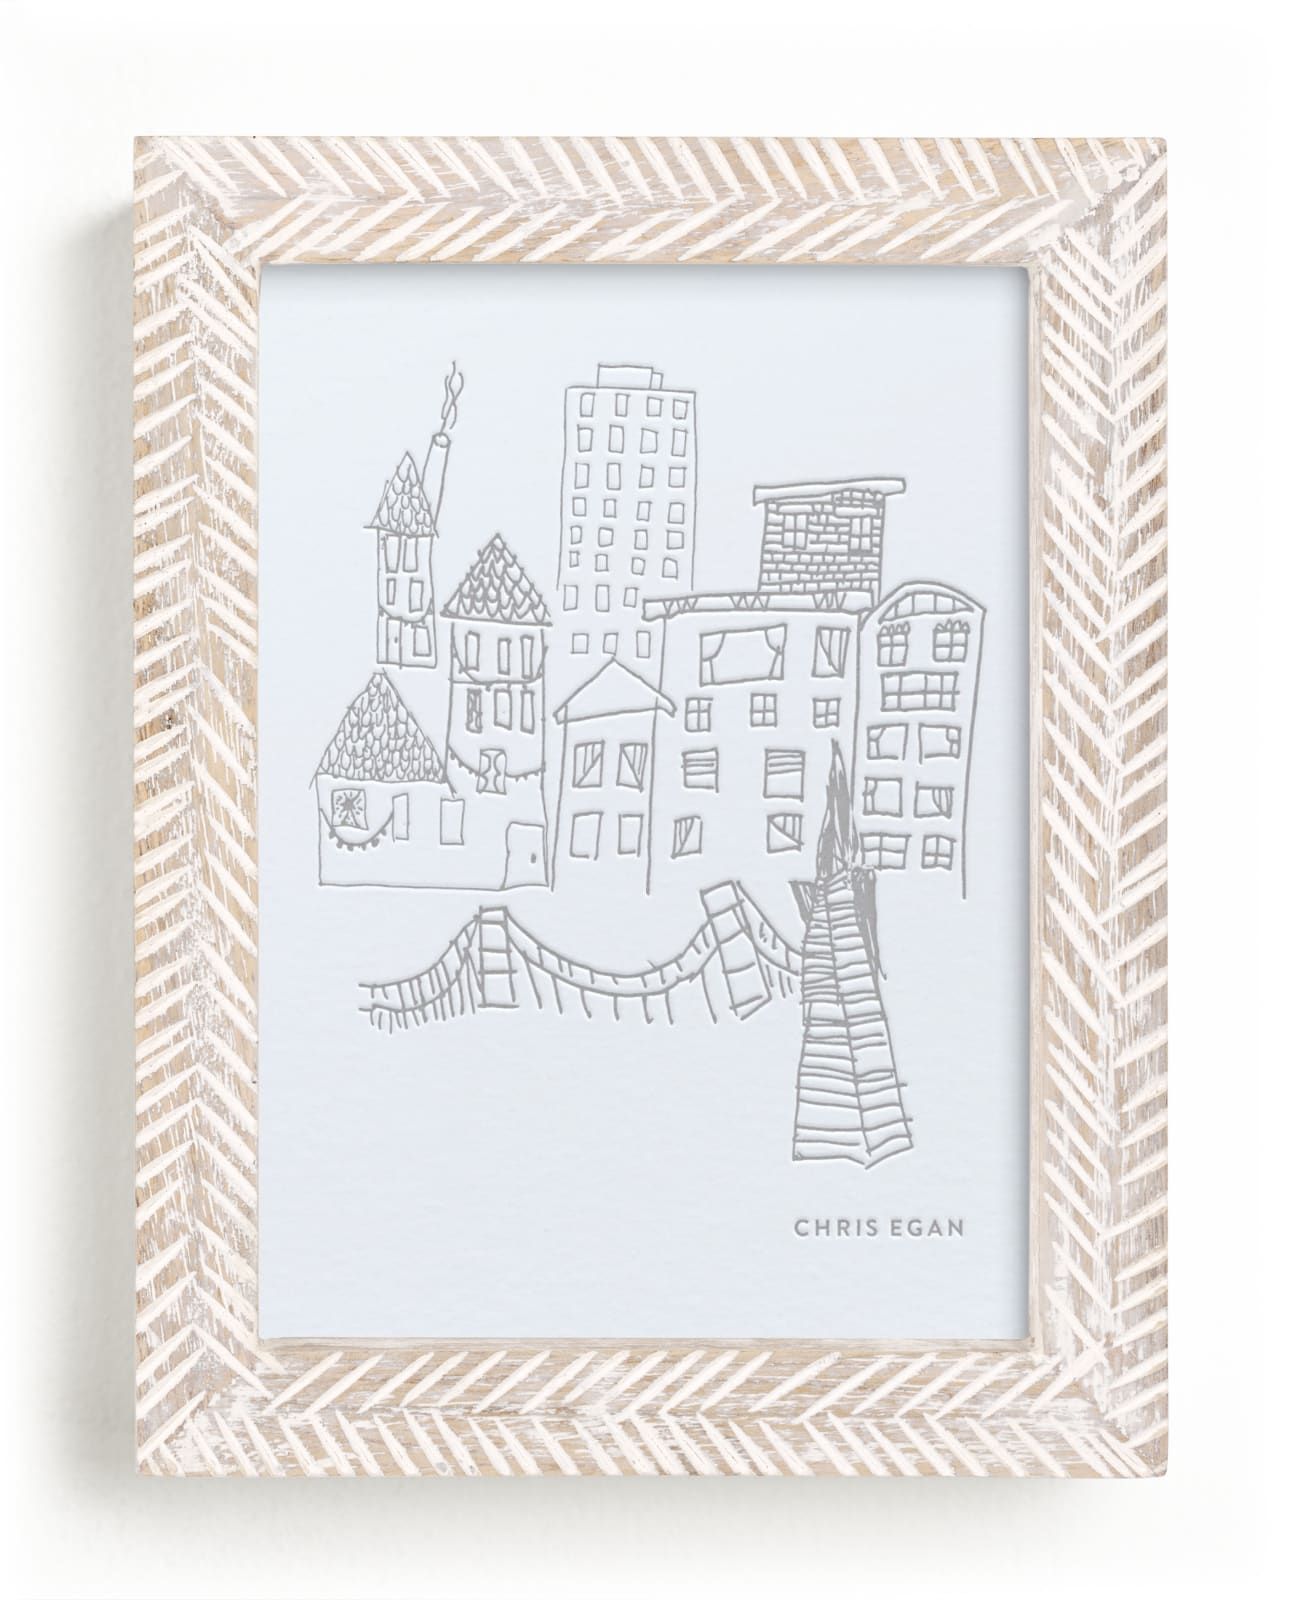 Your Drawing as Letterpress Art Print | Minted